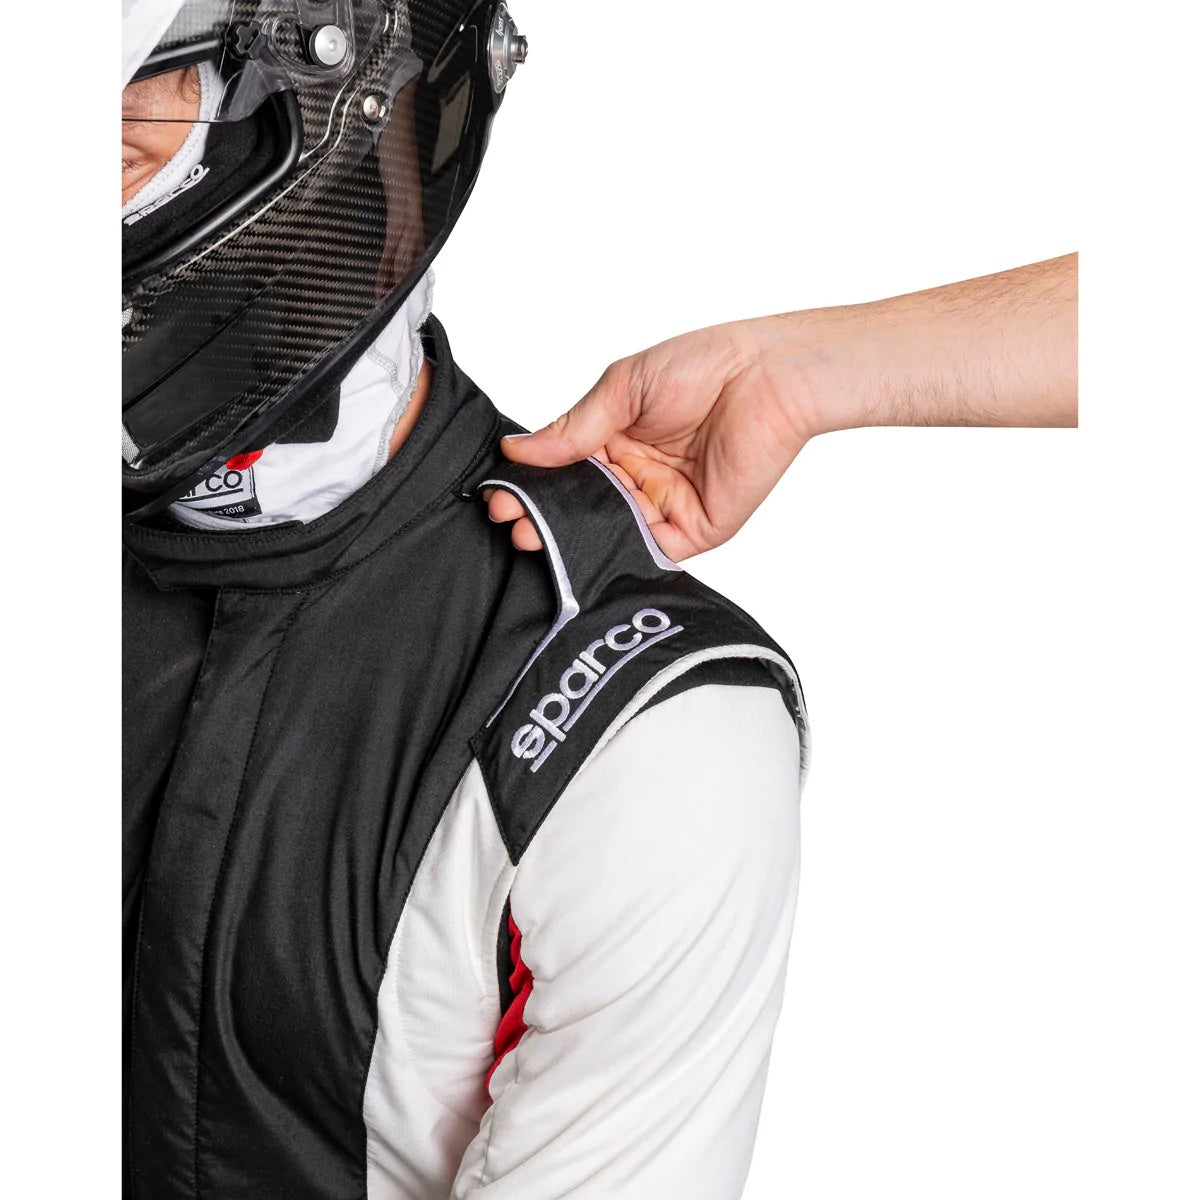 Sparco Competition USA Racing Driver Suit